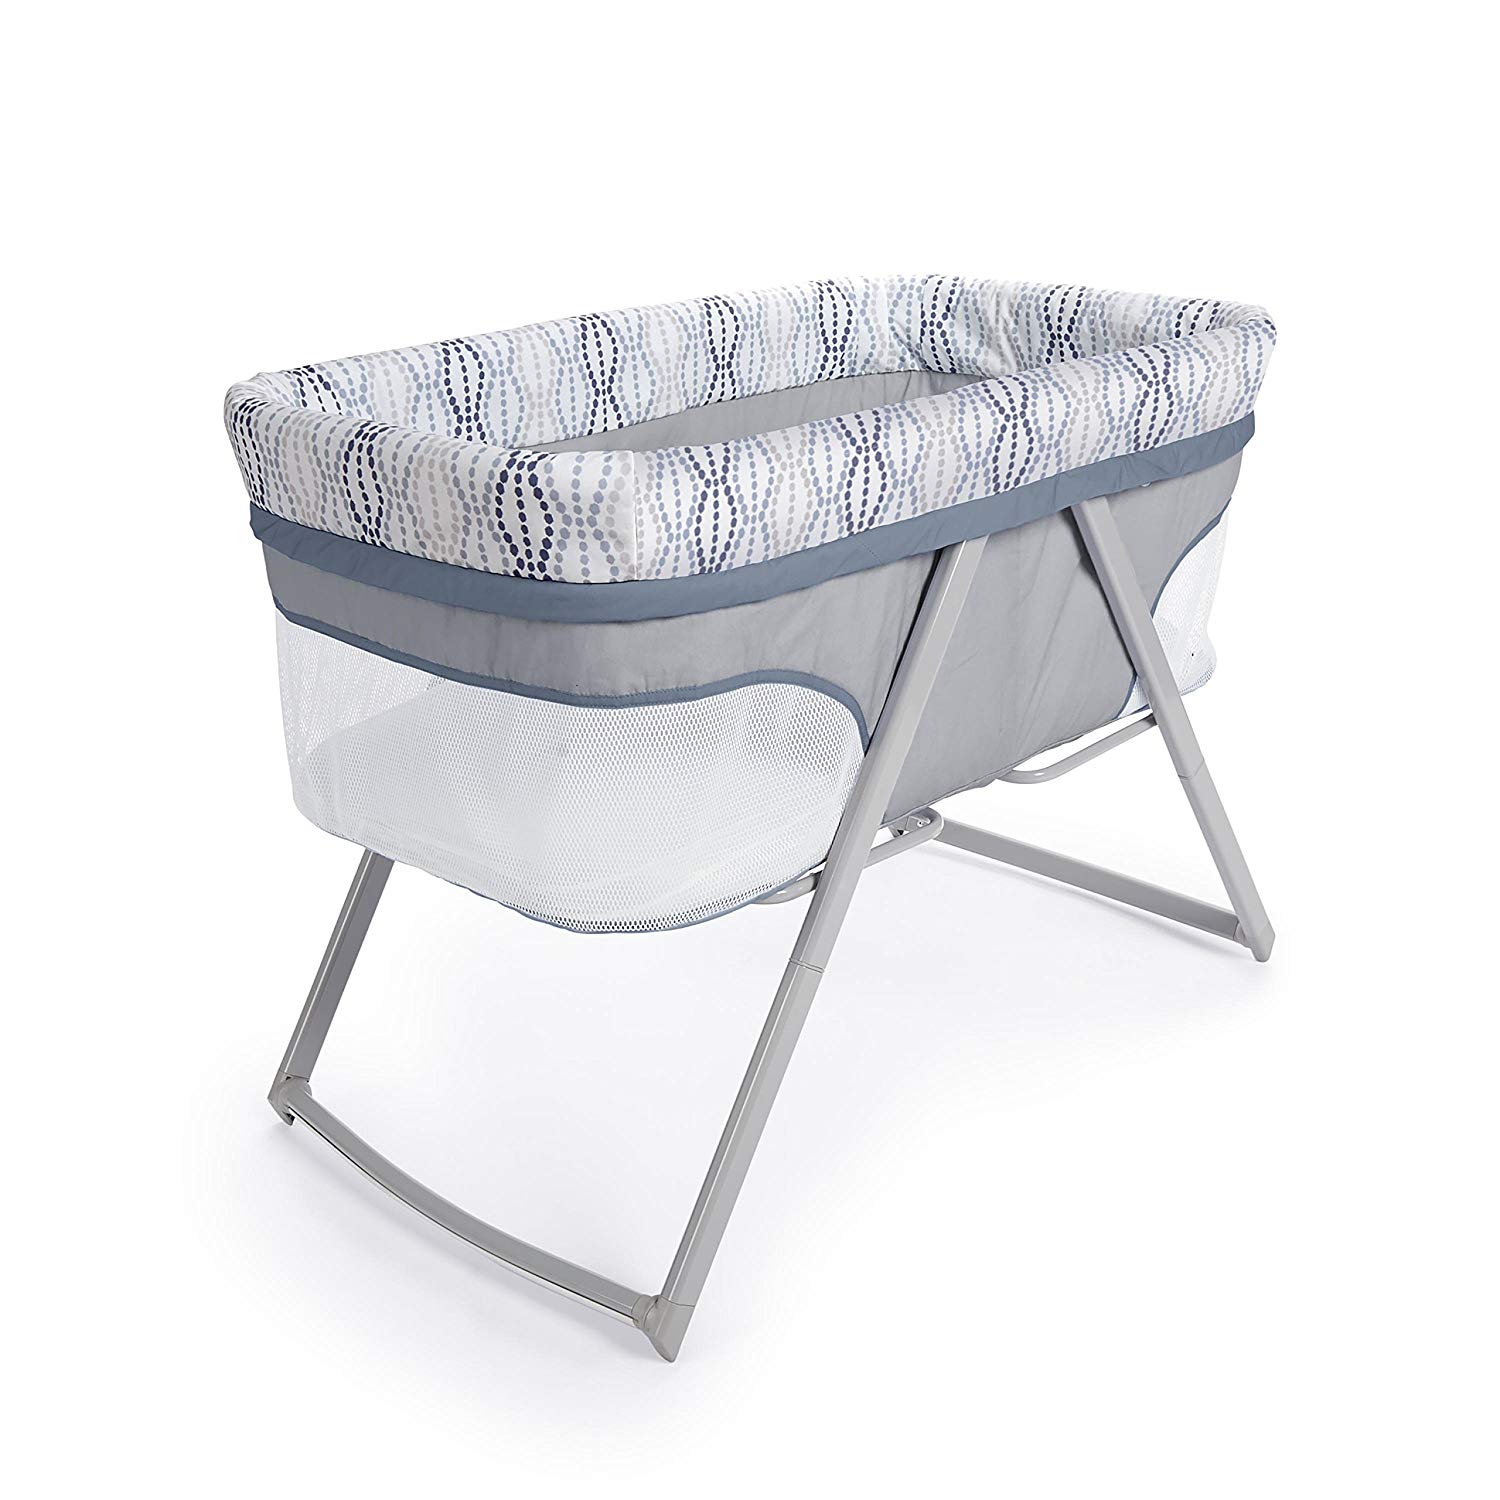 Ingenuity, Fletcher Folding Baby Cot for Easy Transport - Includes Fitted Sheet - Neutral Design